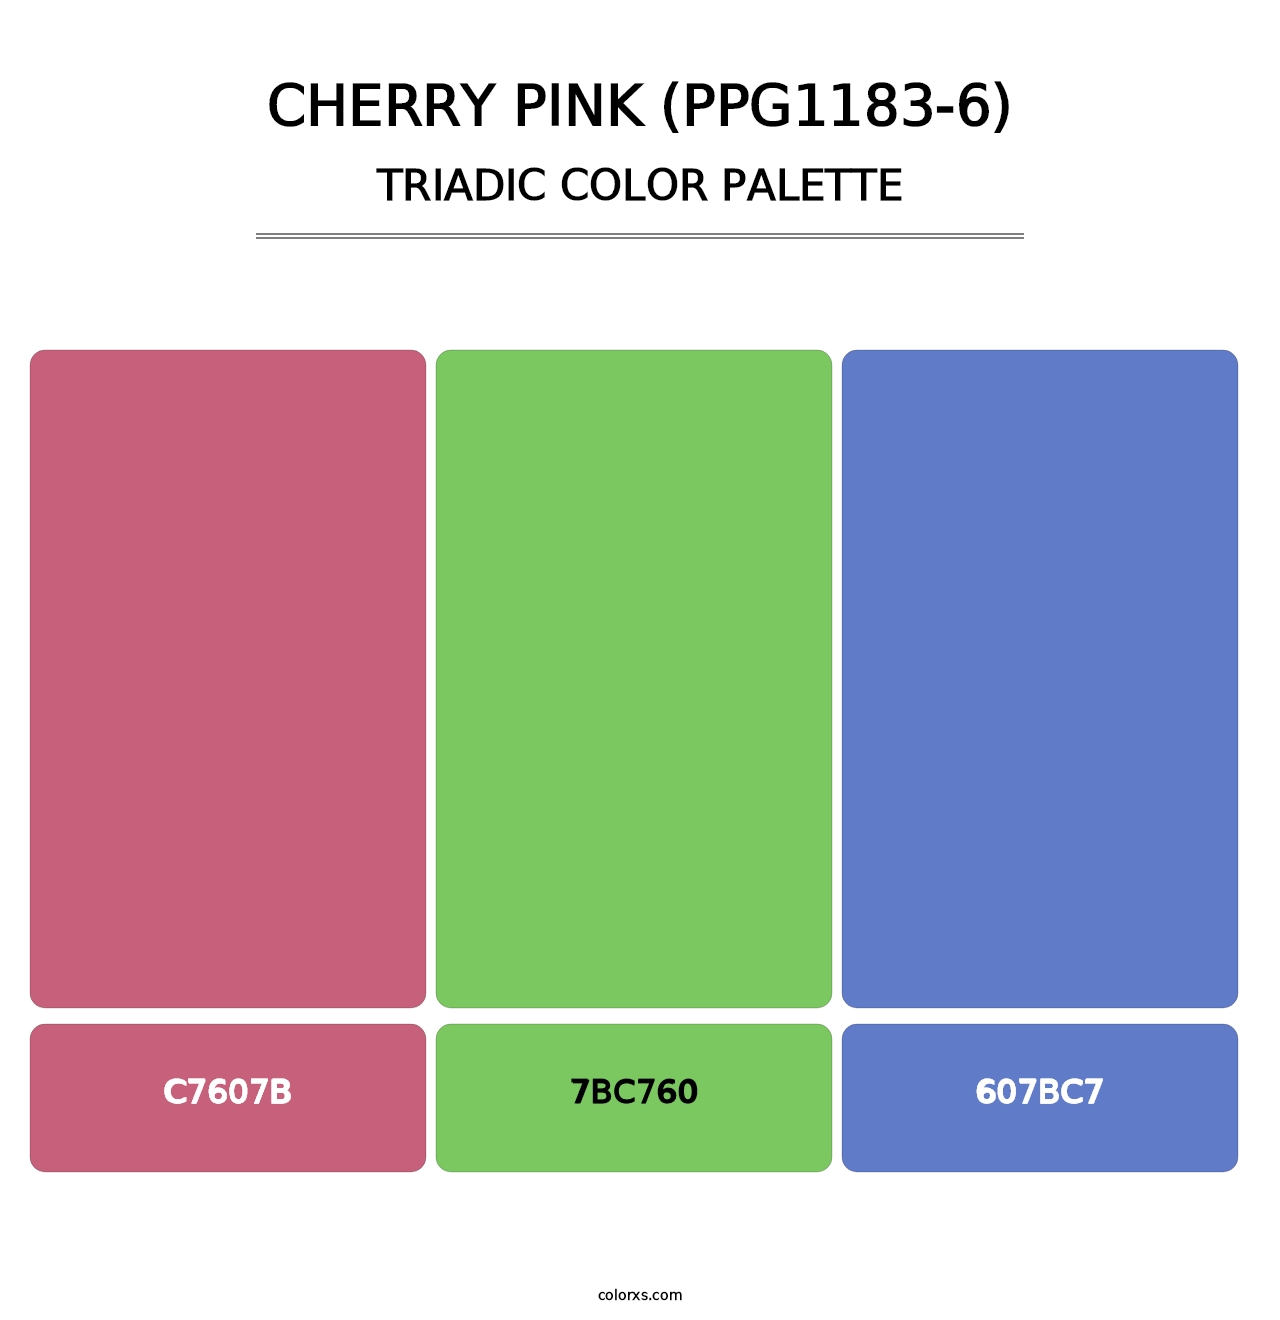 Cherry Pink (PPG1183-6) - Triadic Color Palette